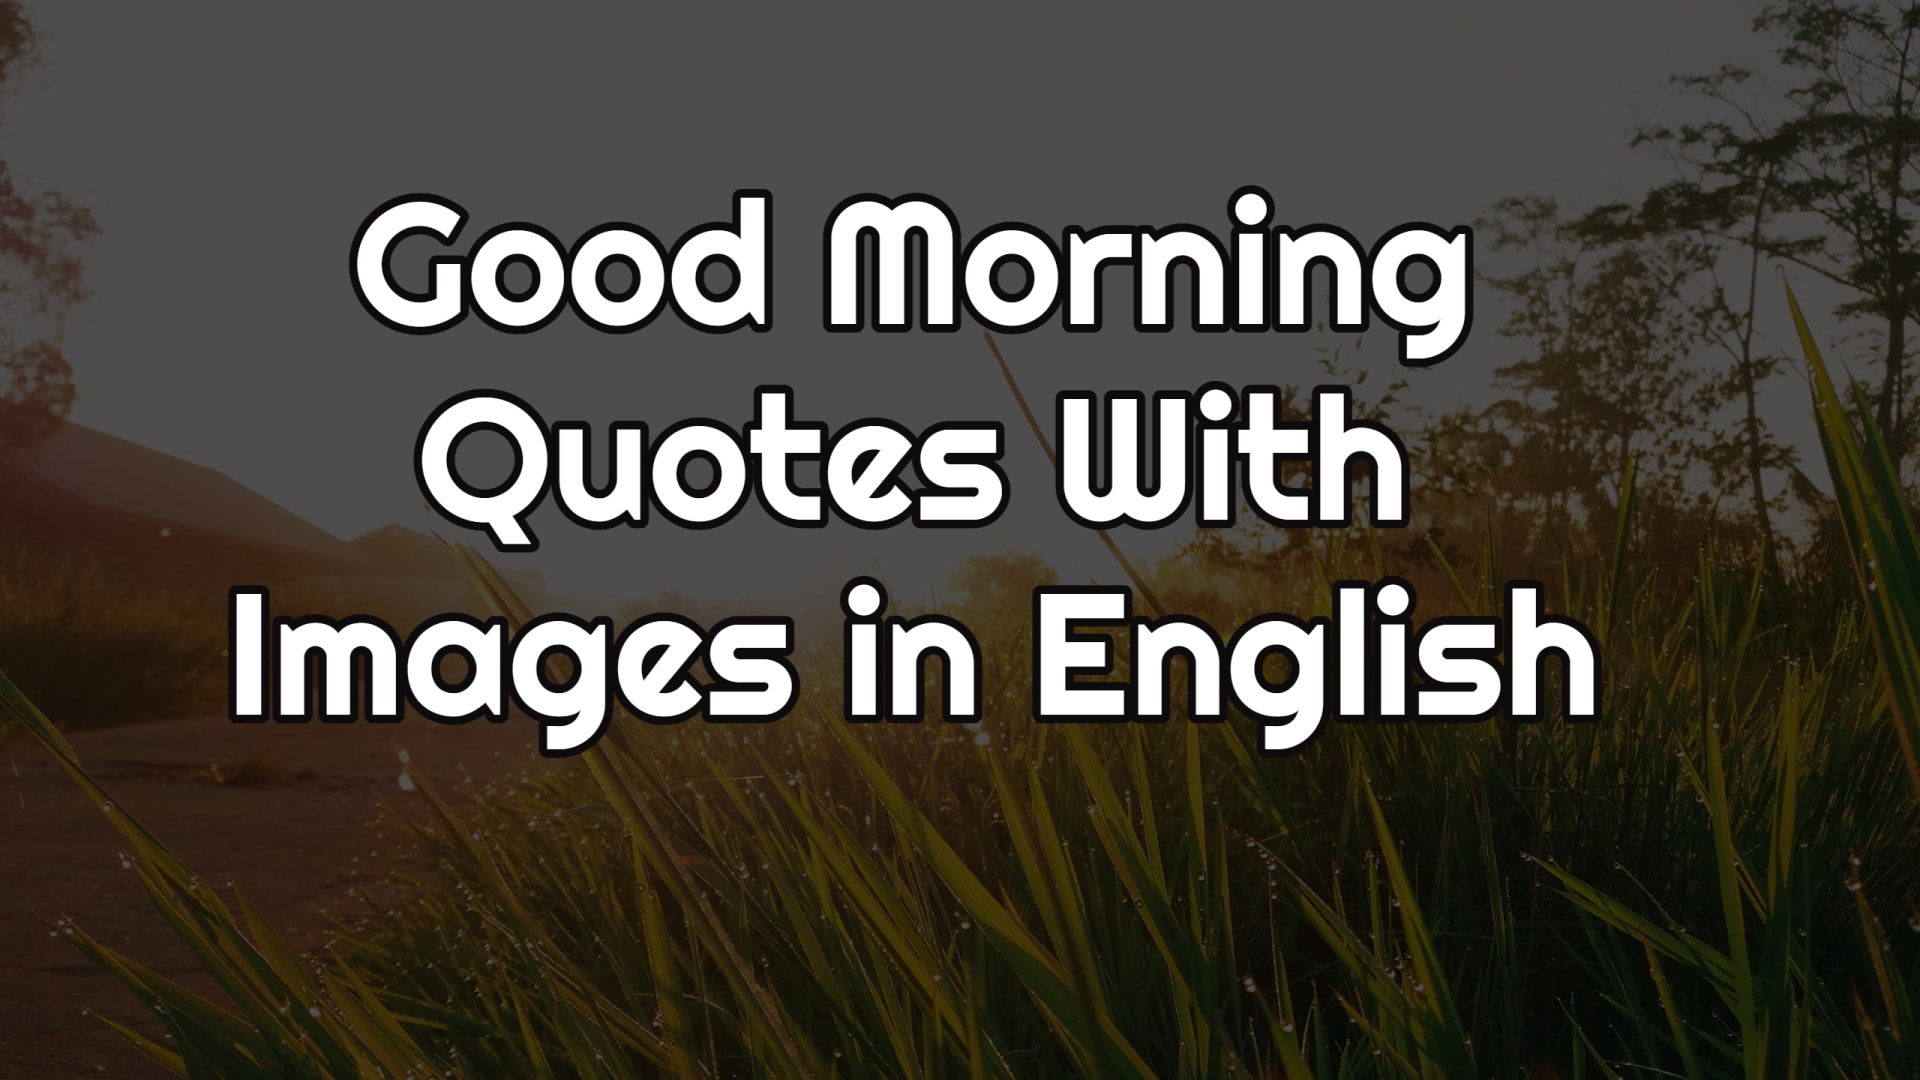 Good Morning Quotes With Images in English